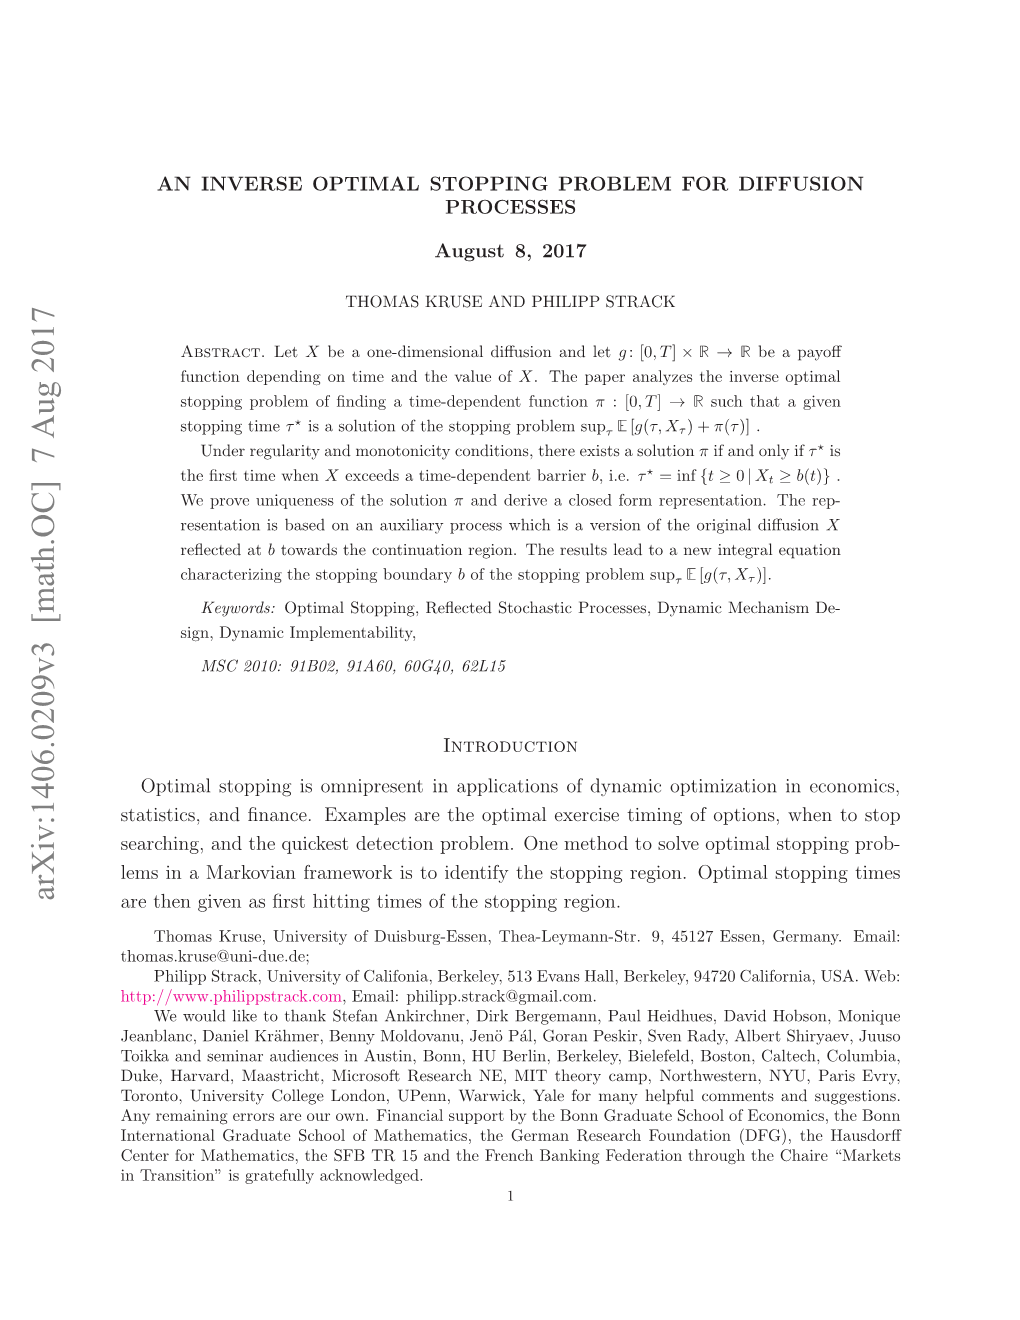 An Inverse Optimal Stopping Problem for Diffusion Processes August 8, 2017